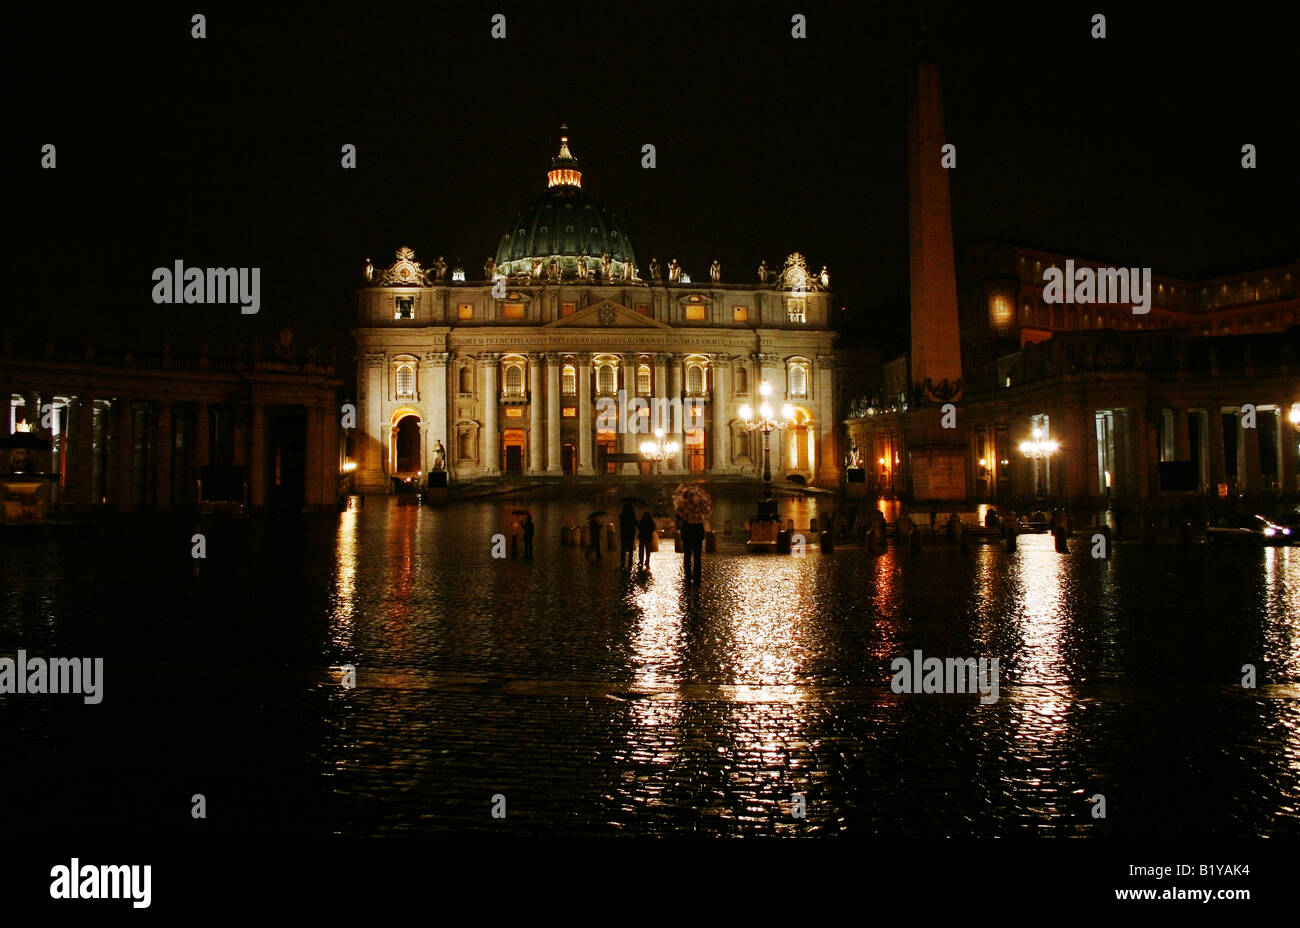 Night time reflections on rain soaked cobblestones, St Peters Basilica and Square, Vatican City, Rome, Italy Stock Photo